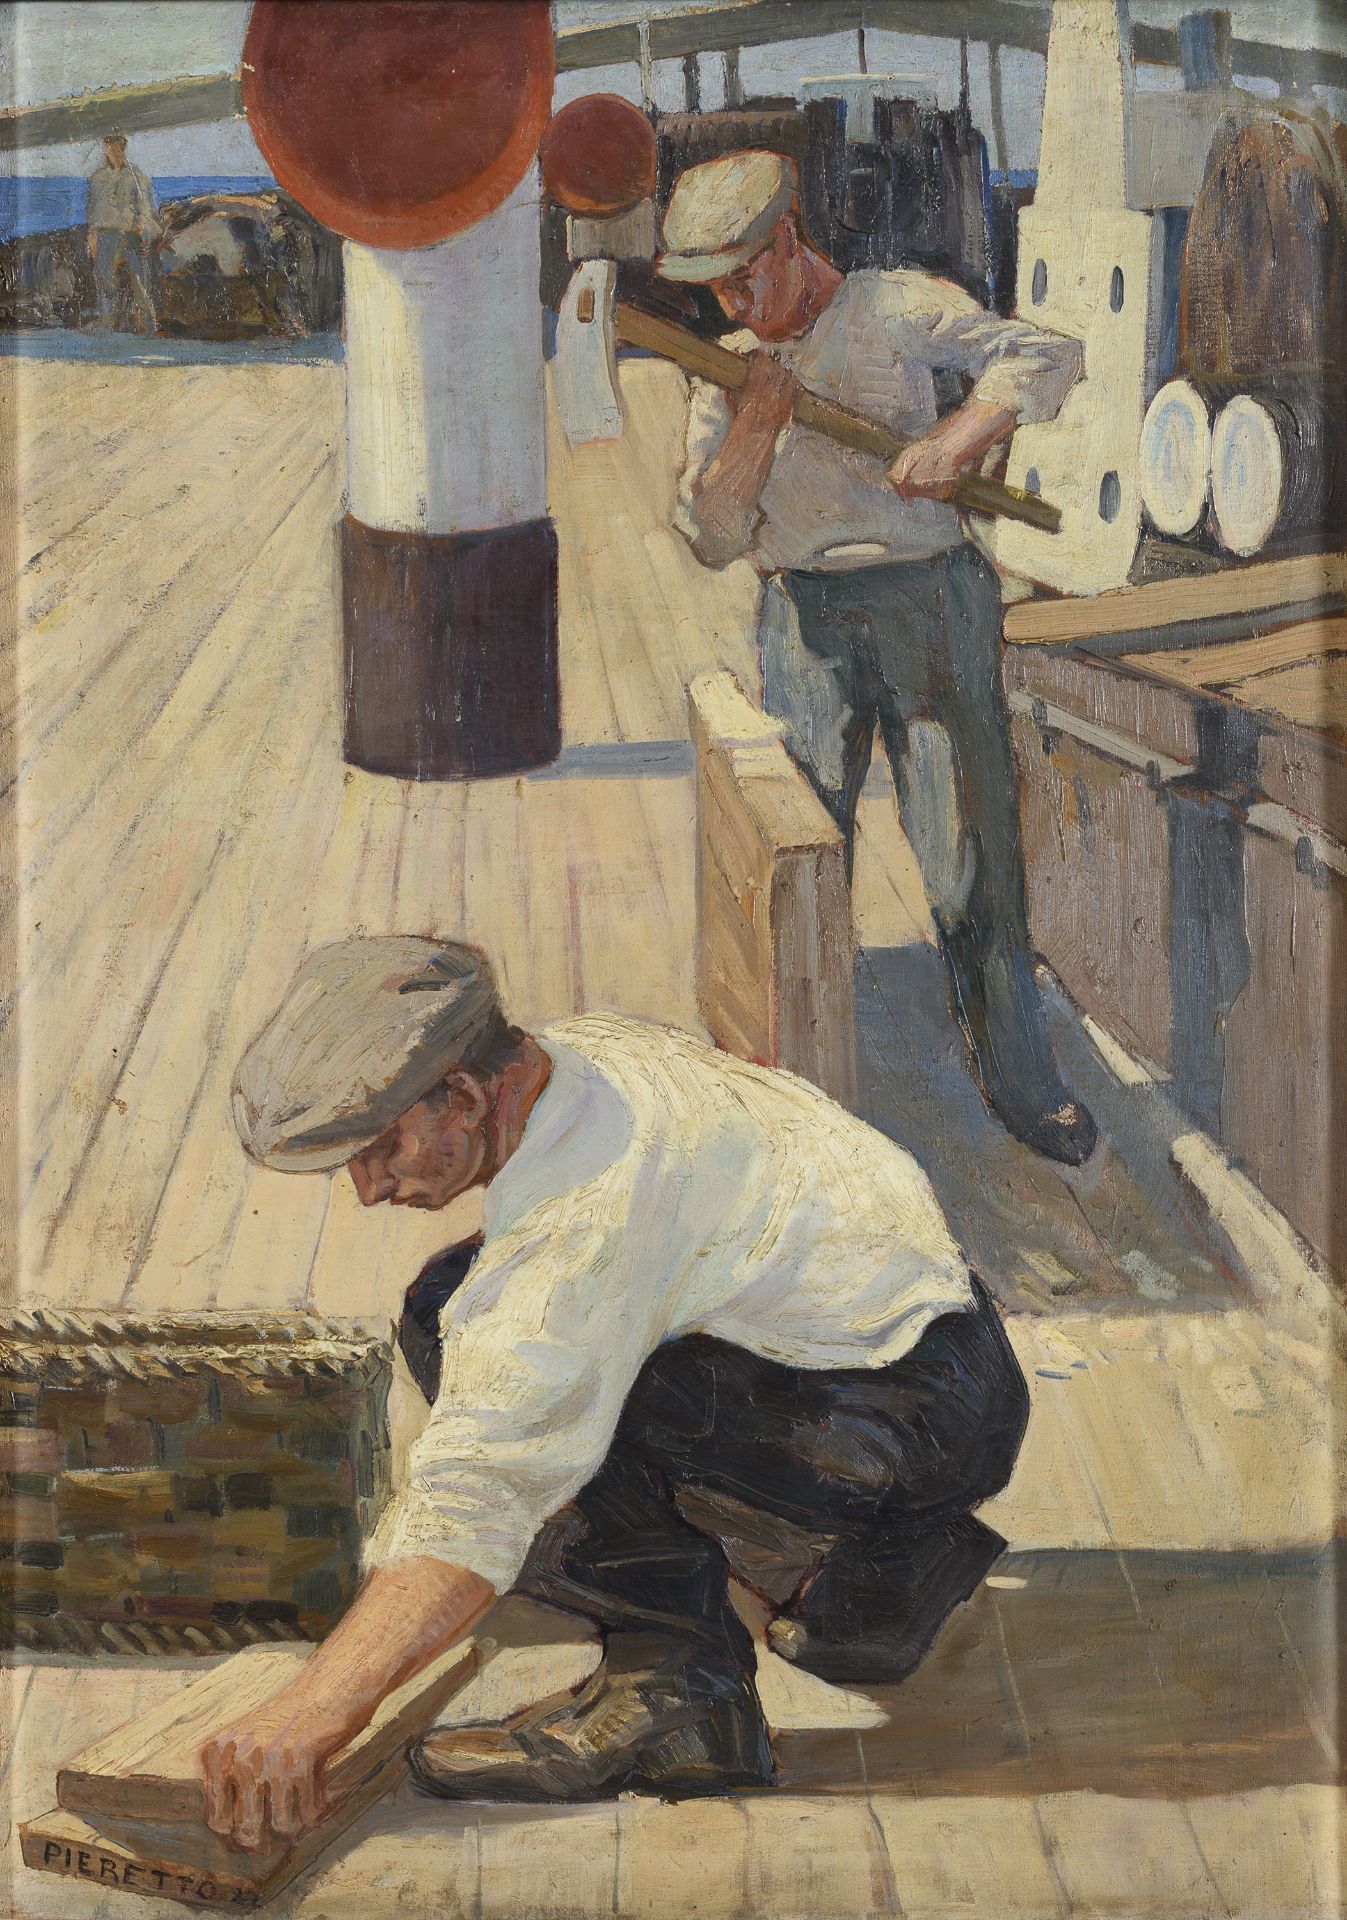 OIL PAINTING OF SAILORS BY PIERETTO BIANCO 1922